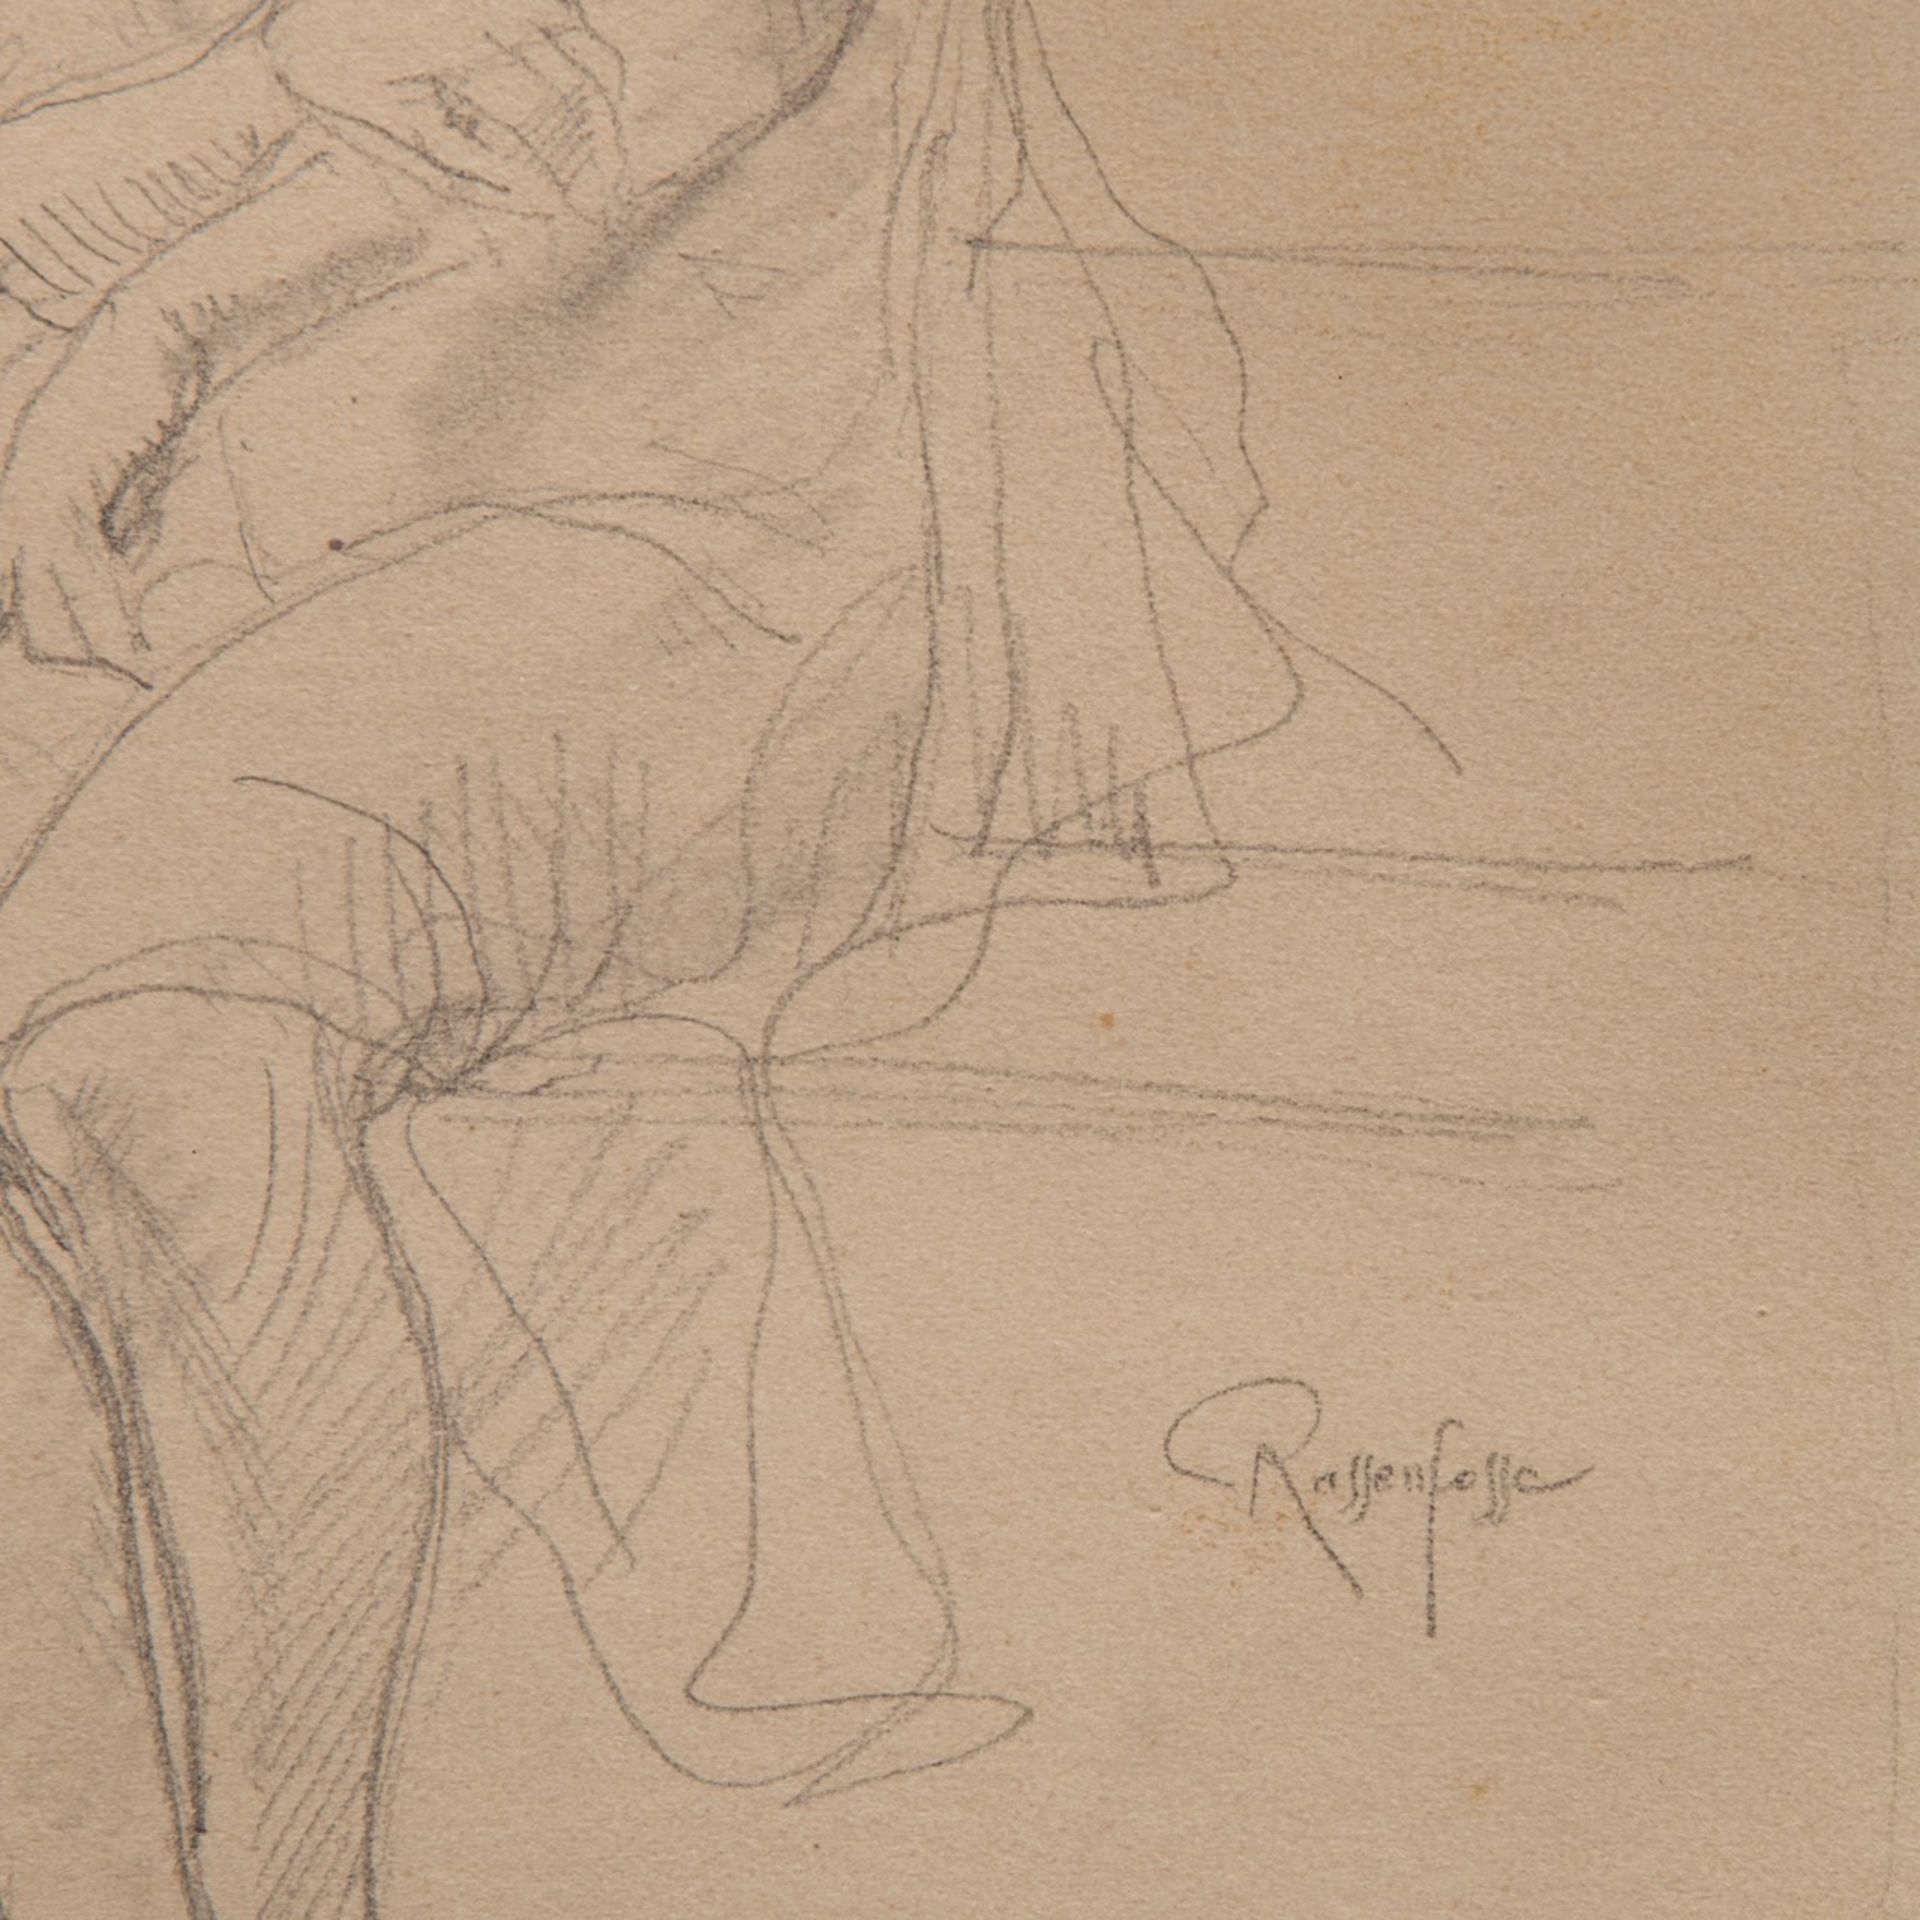 Armand Rassenfosse (1862-1934), seated girl, pencil drawing on paper 26 x 16.5 cm. (10.2 x 6 1/2 in. - Image 4 of 6